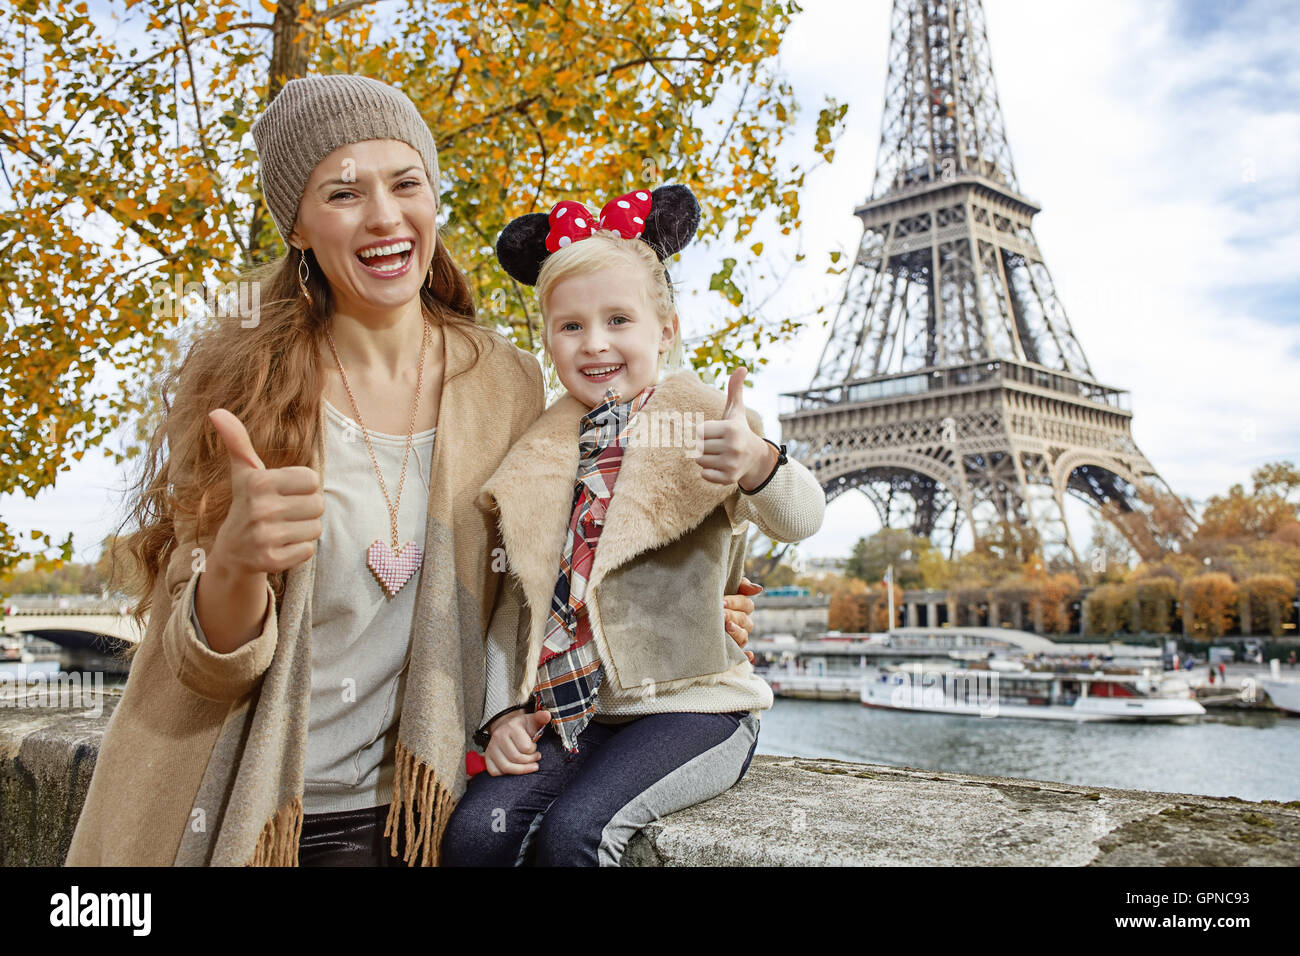 Perfect autumn holidays in Disneyland and Paris. Portrait of smiling tourists mother and daughter in Minnie Mouse Ears on embank Stock Photo